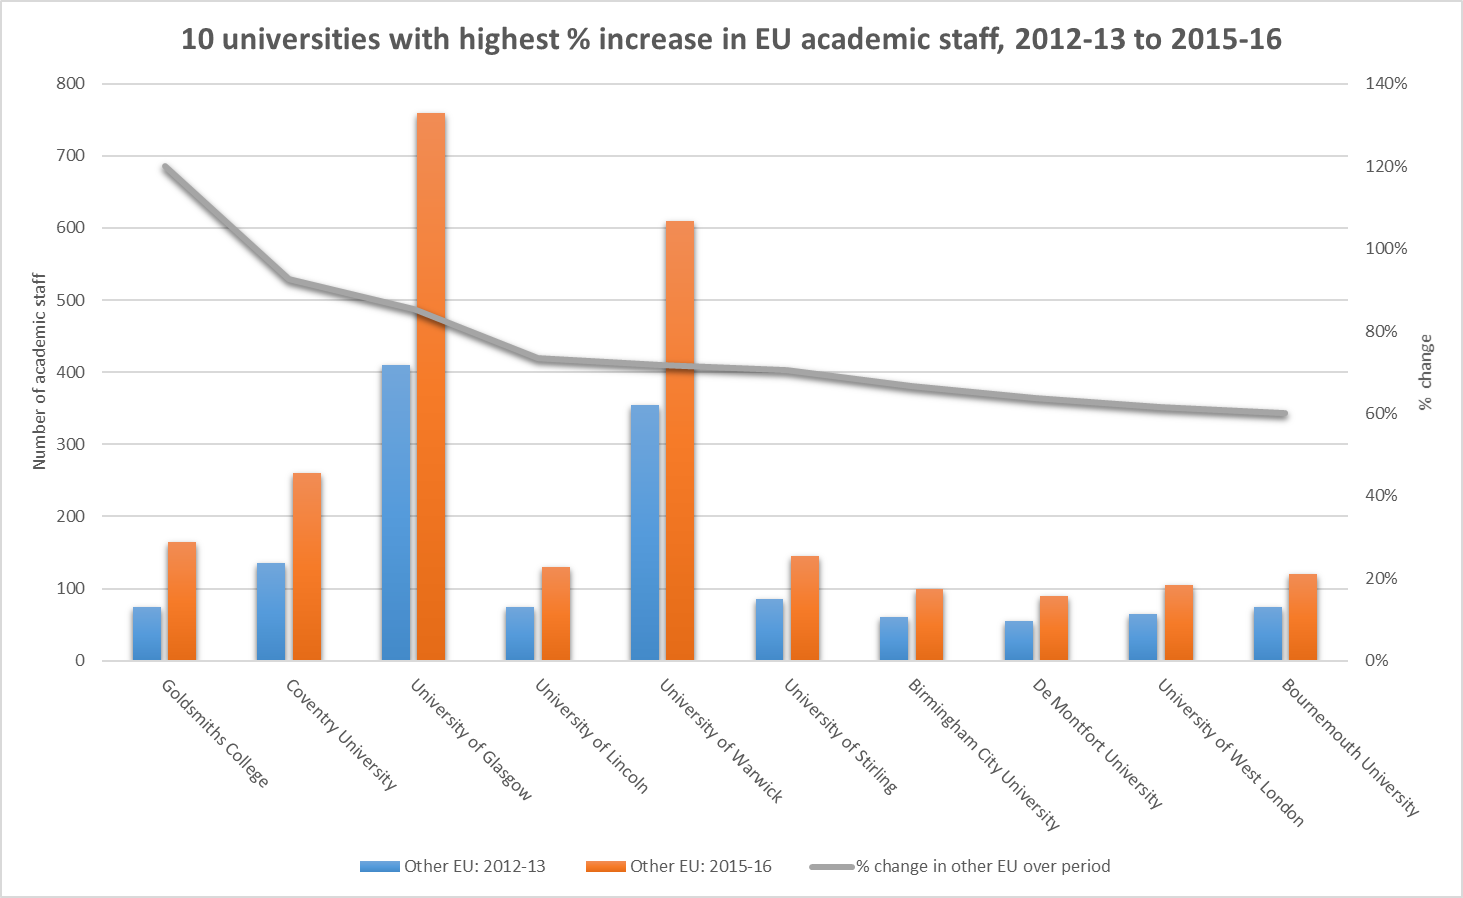 10 universities with highest % increase in EU academic staff, 2012-13 to 2015-16